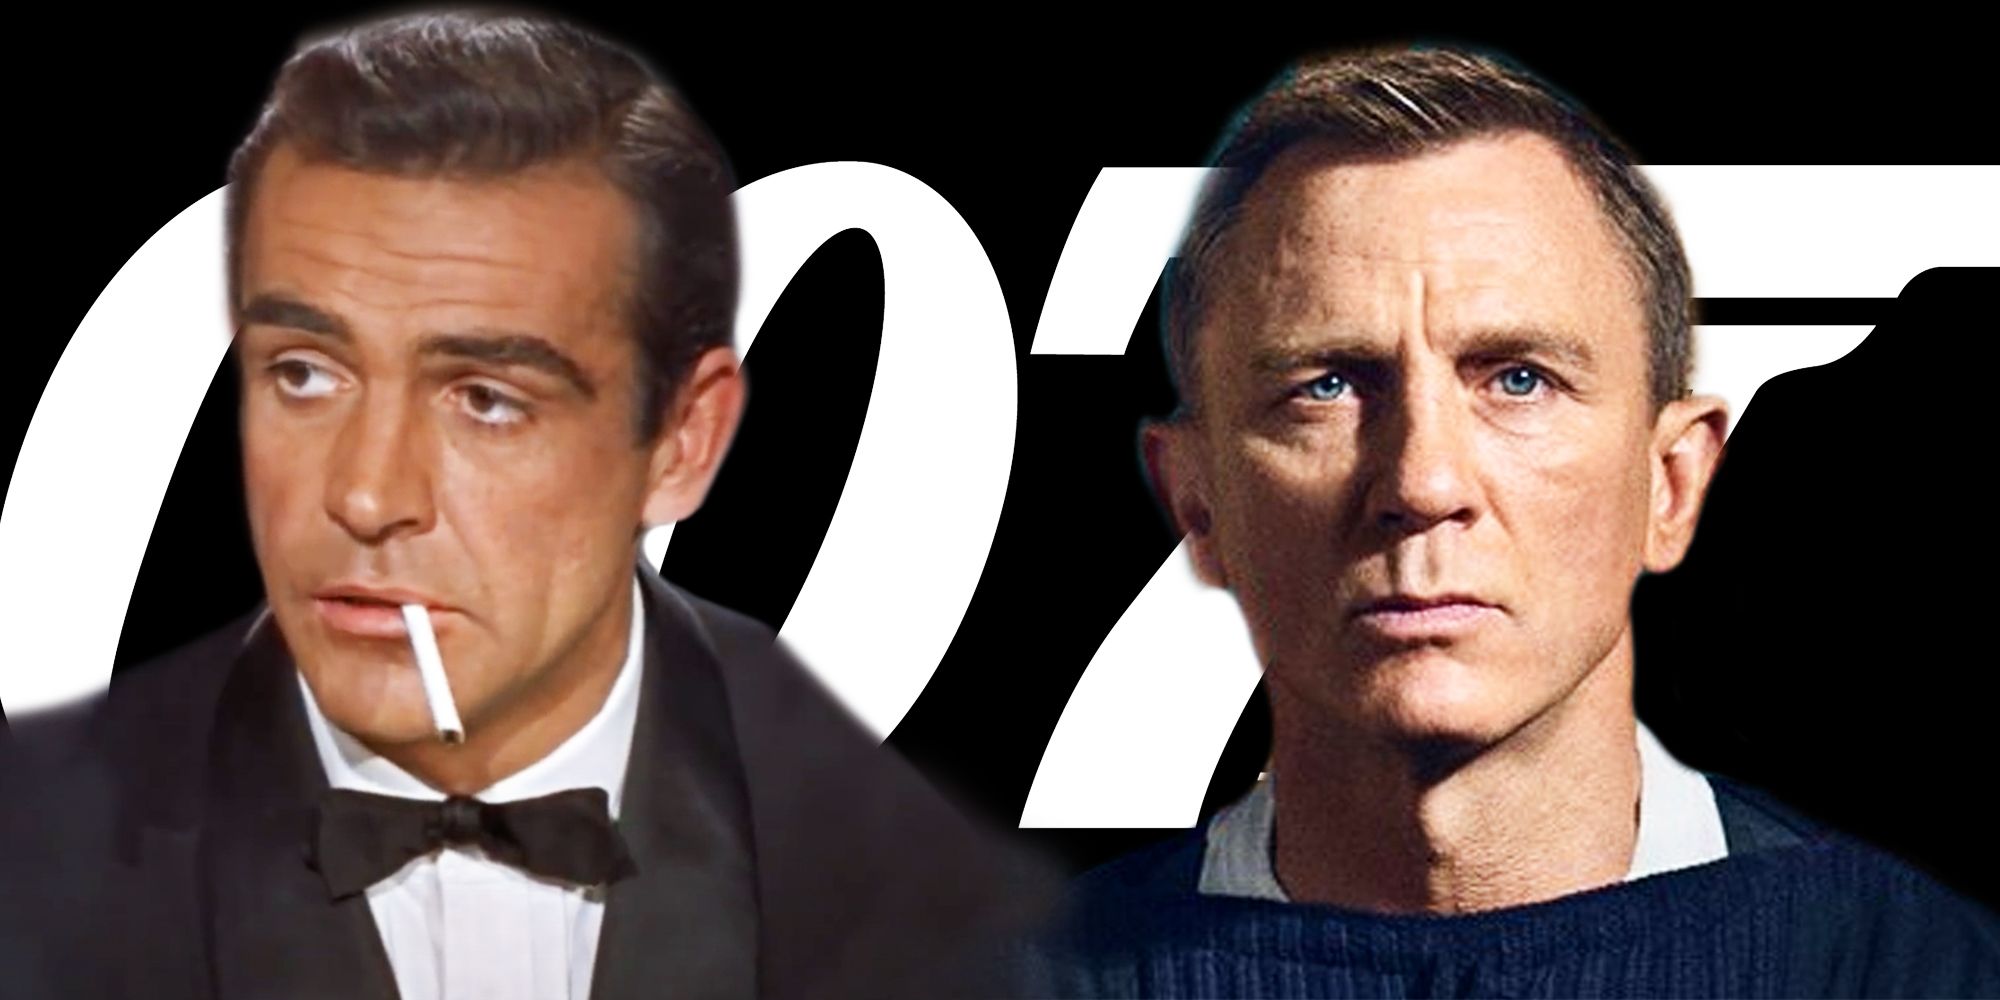 Sean Connery and Daniel Craig as James Bond in front of a 007 logo